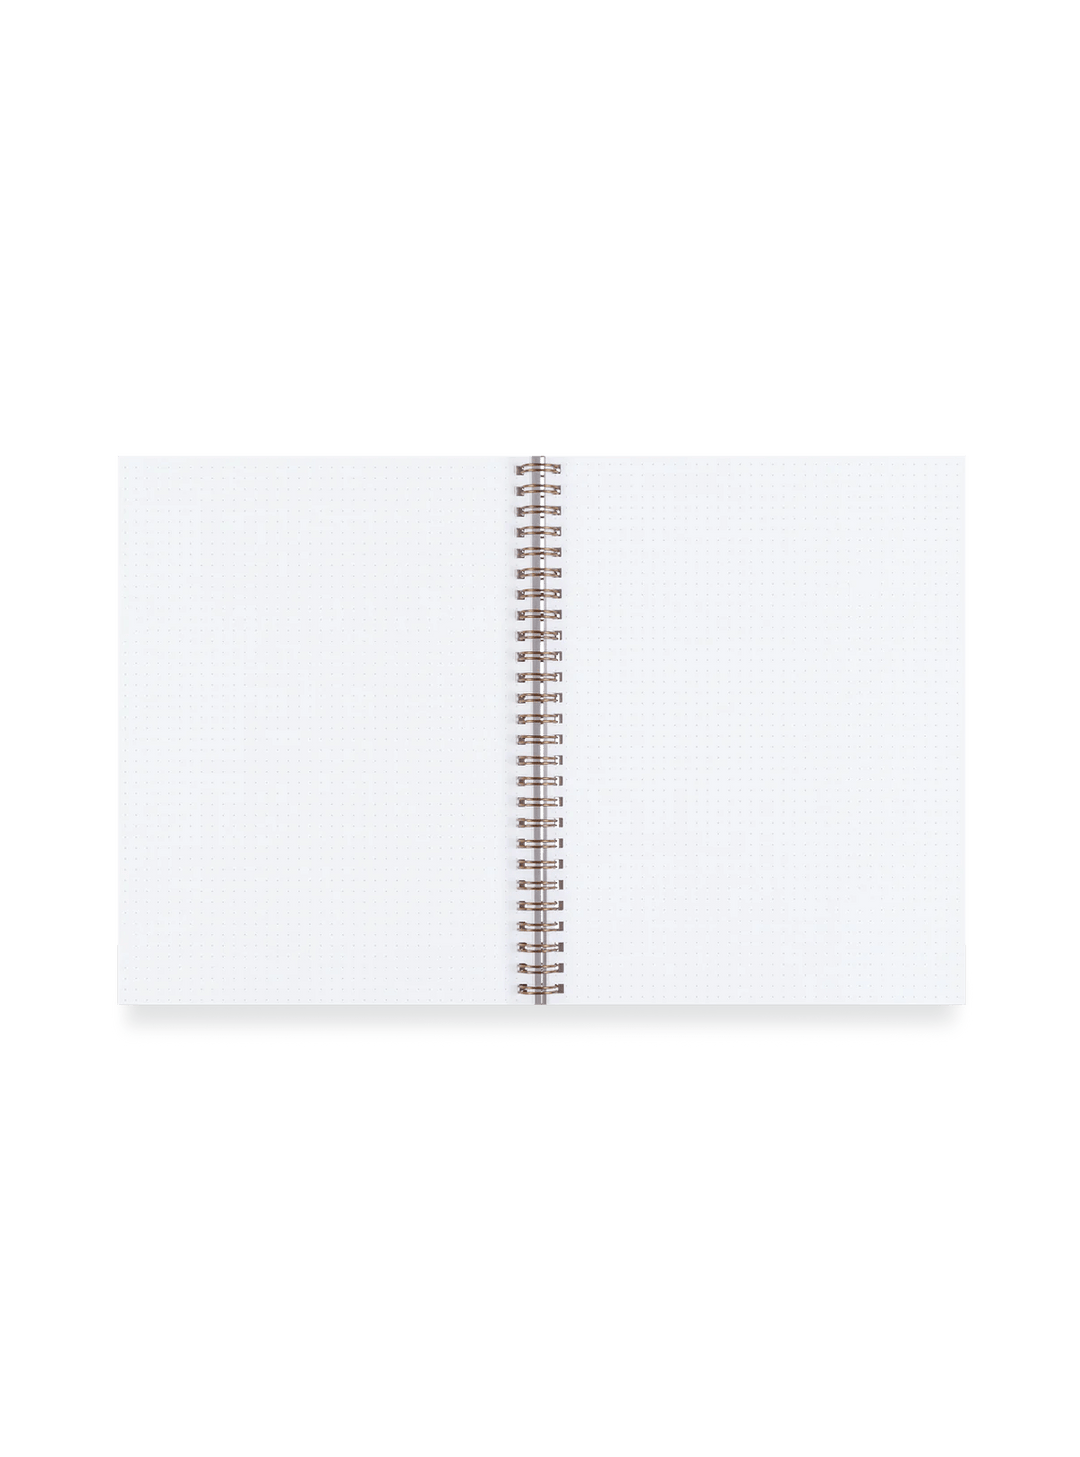 Appointed Notebooks & Notepads DC Workbook